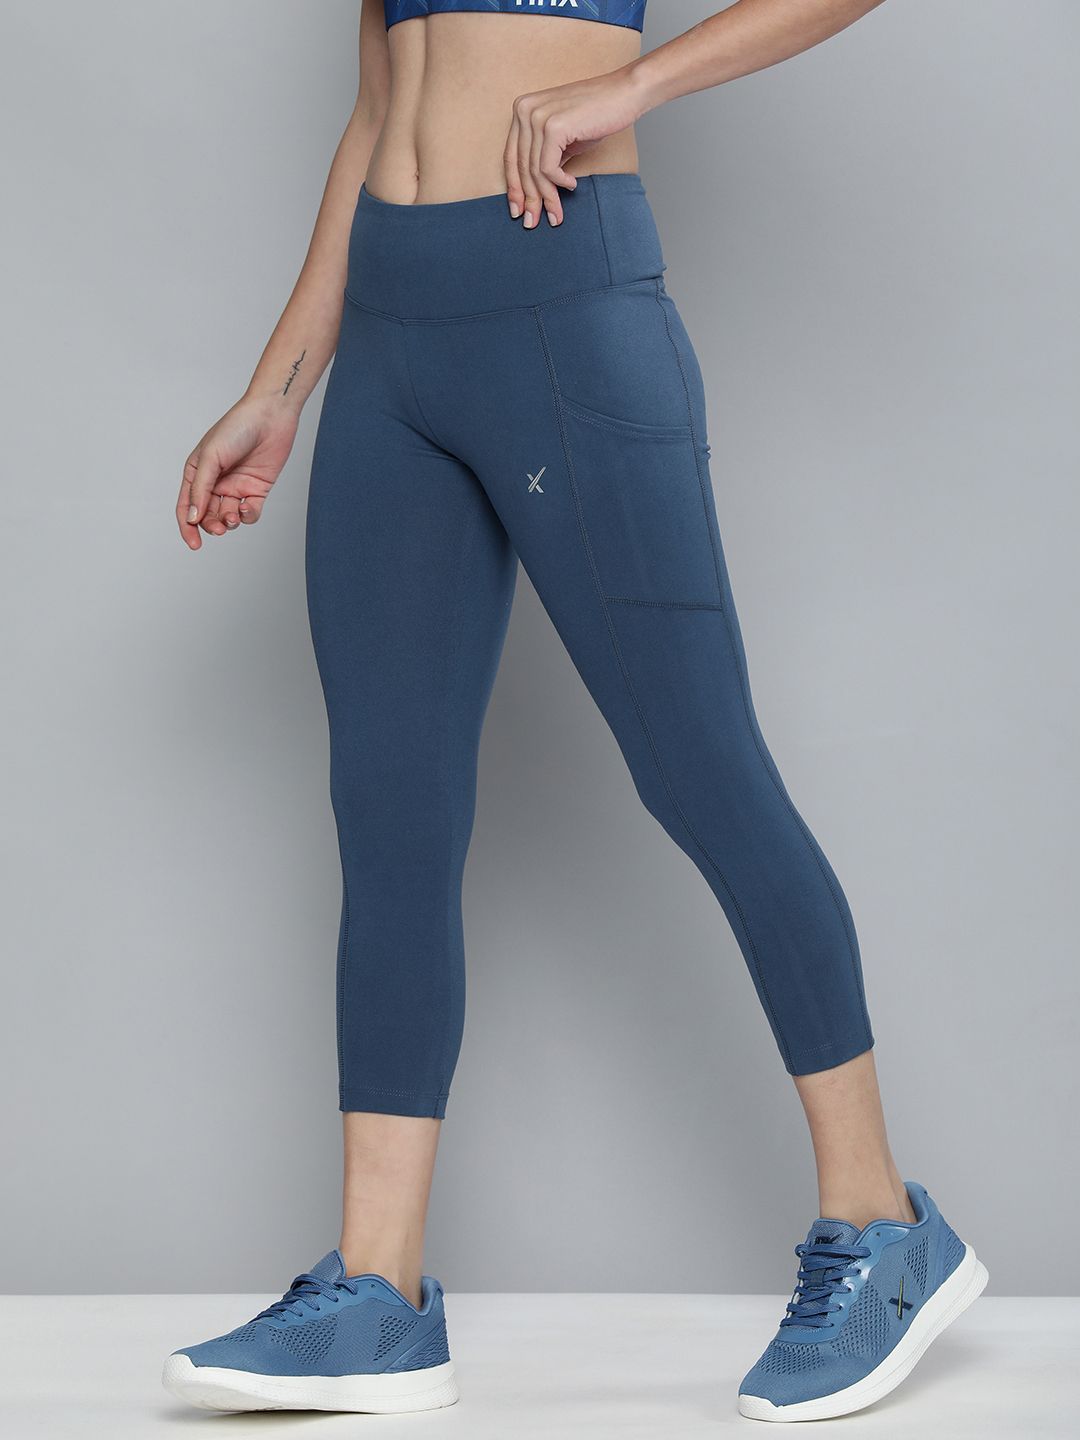 HRX By Hrithik Roshan Women Blue Rapid-Dry Yoga Tights Price in India